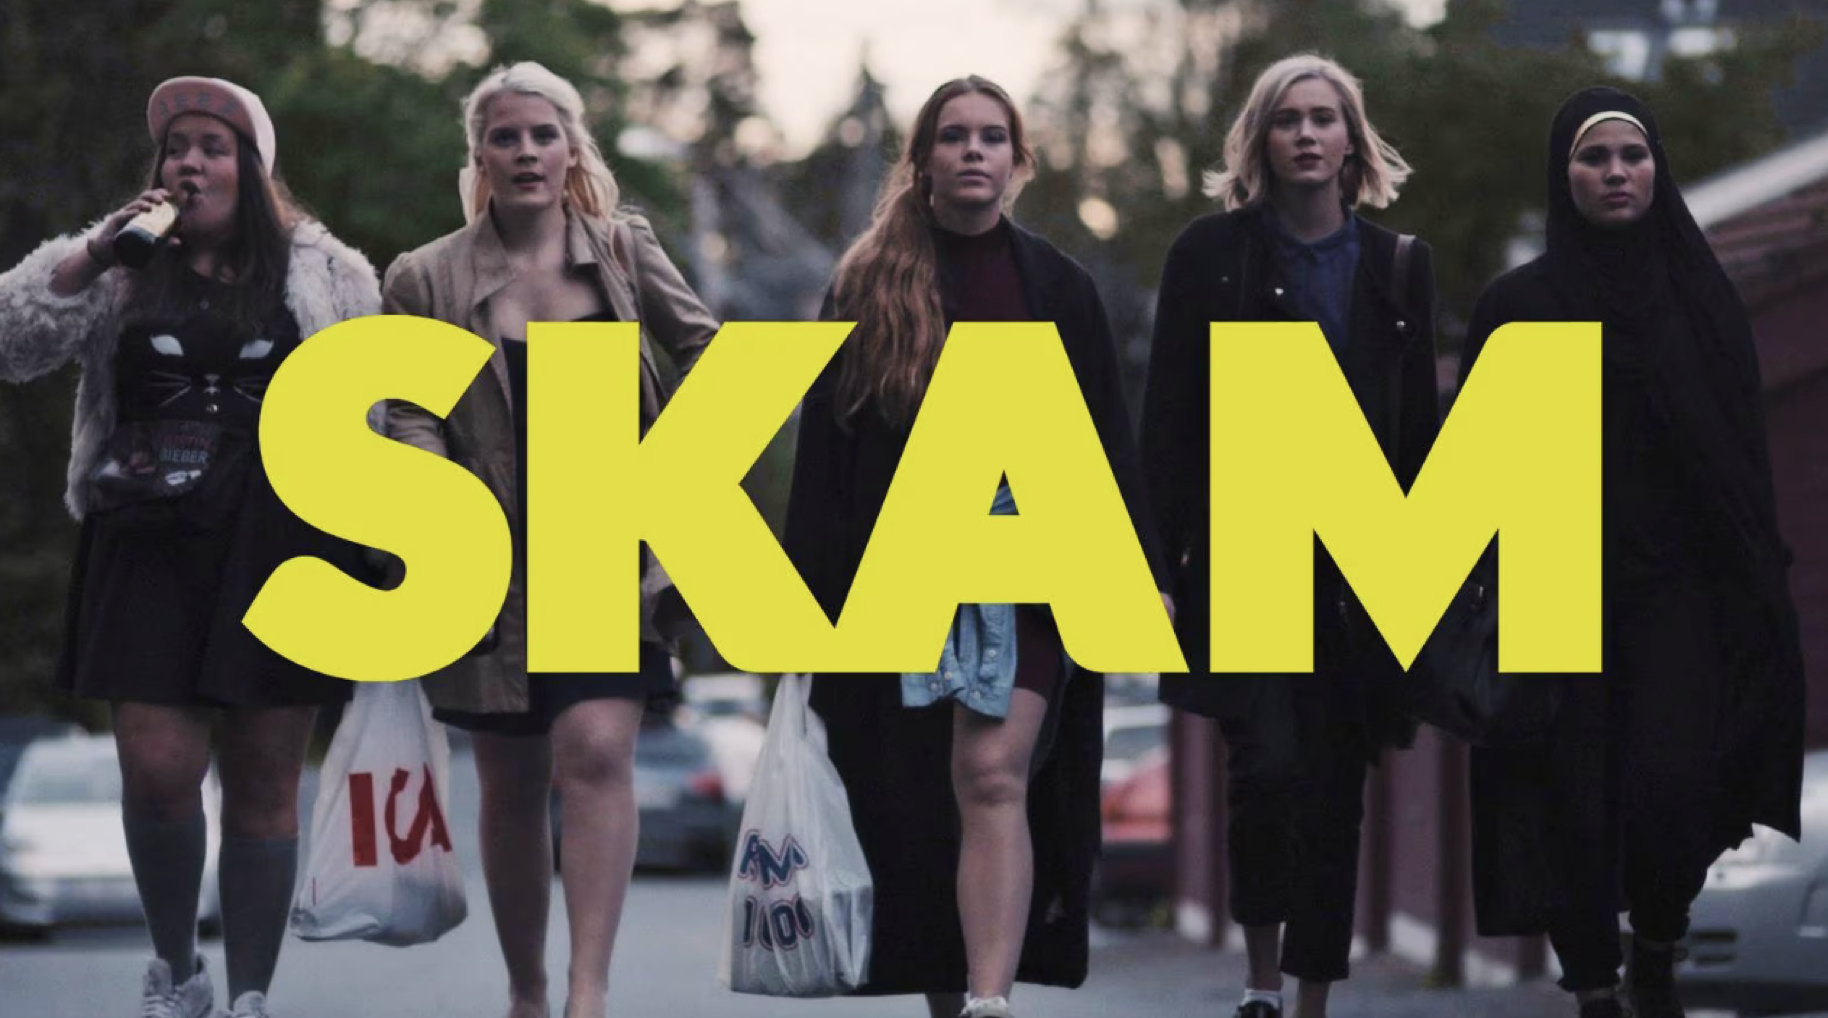 Five women walk forward in a line with the title SKAM center across the image.